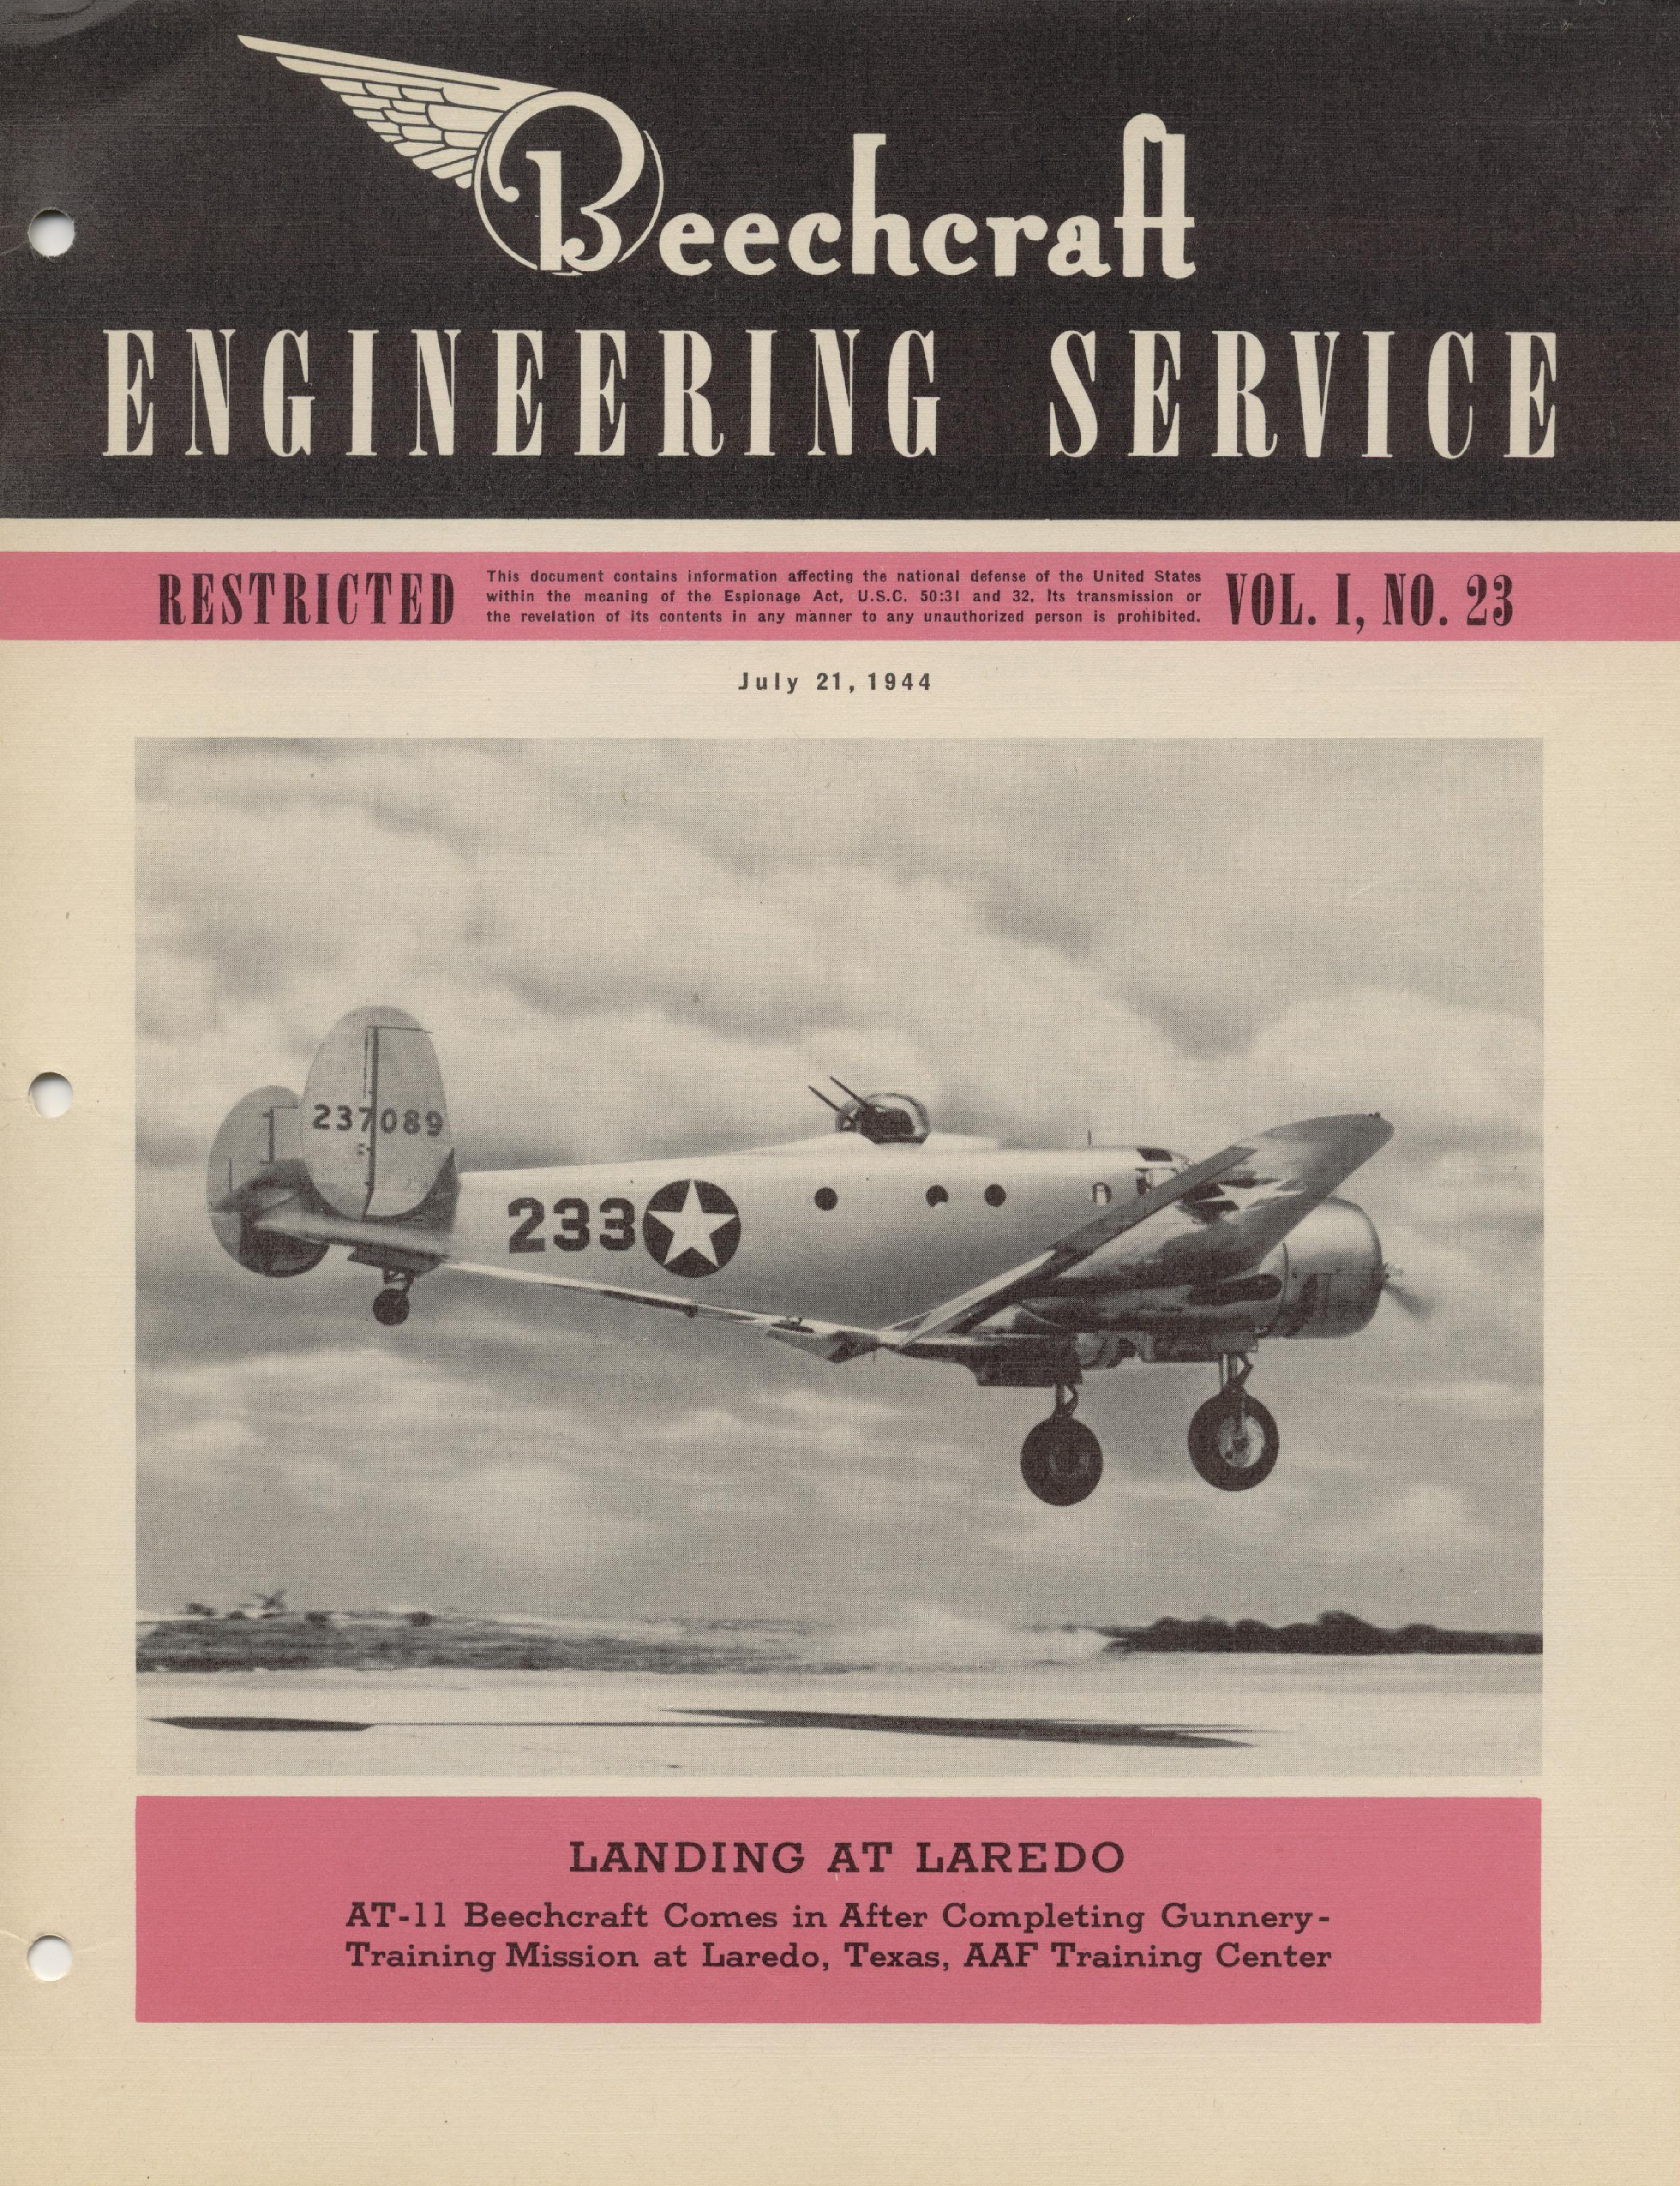 Sample page 1 from AirCorps Library document: Vol. I, No. 23 - Beechcraft Engineering Service